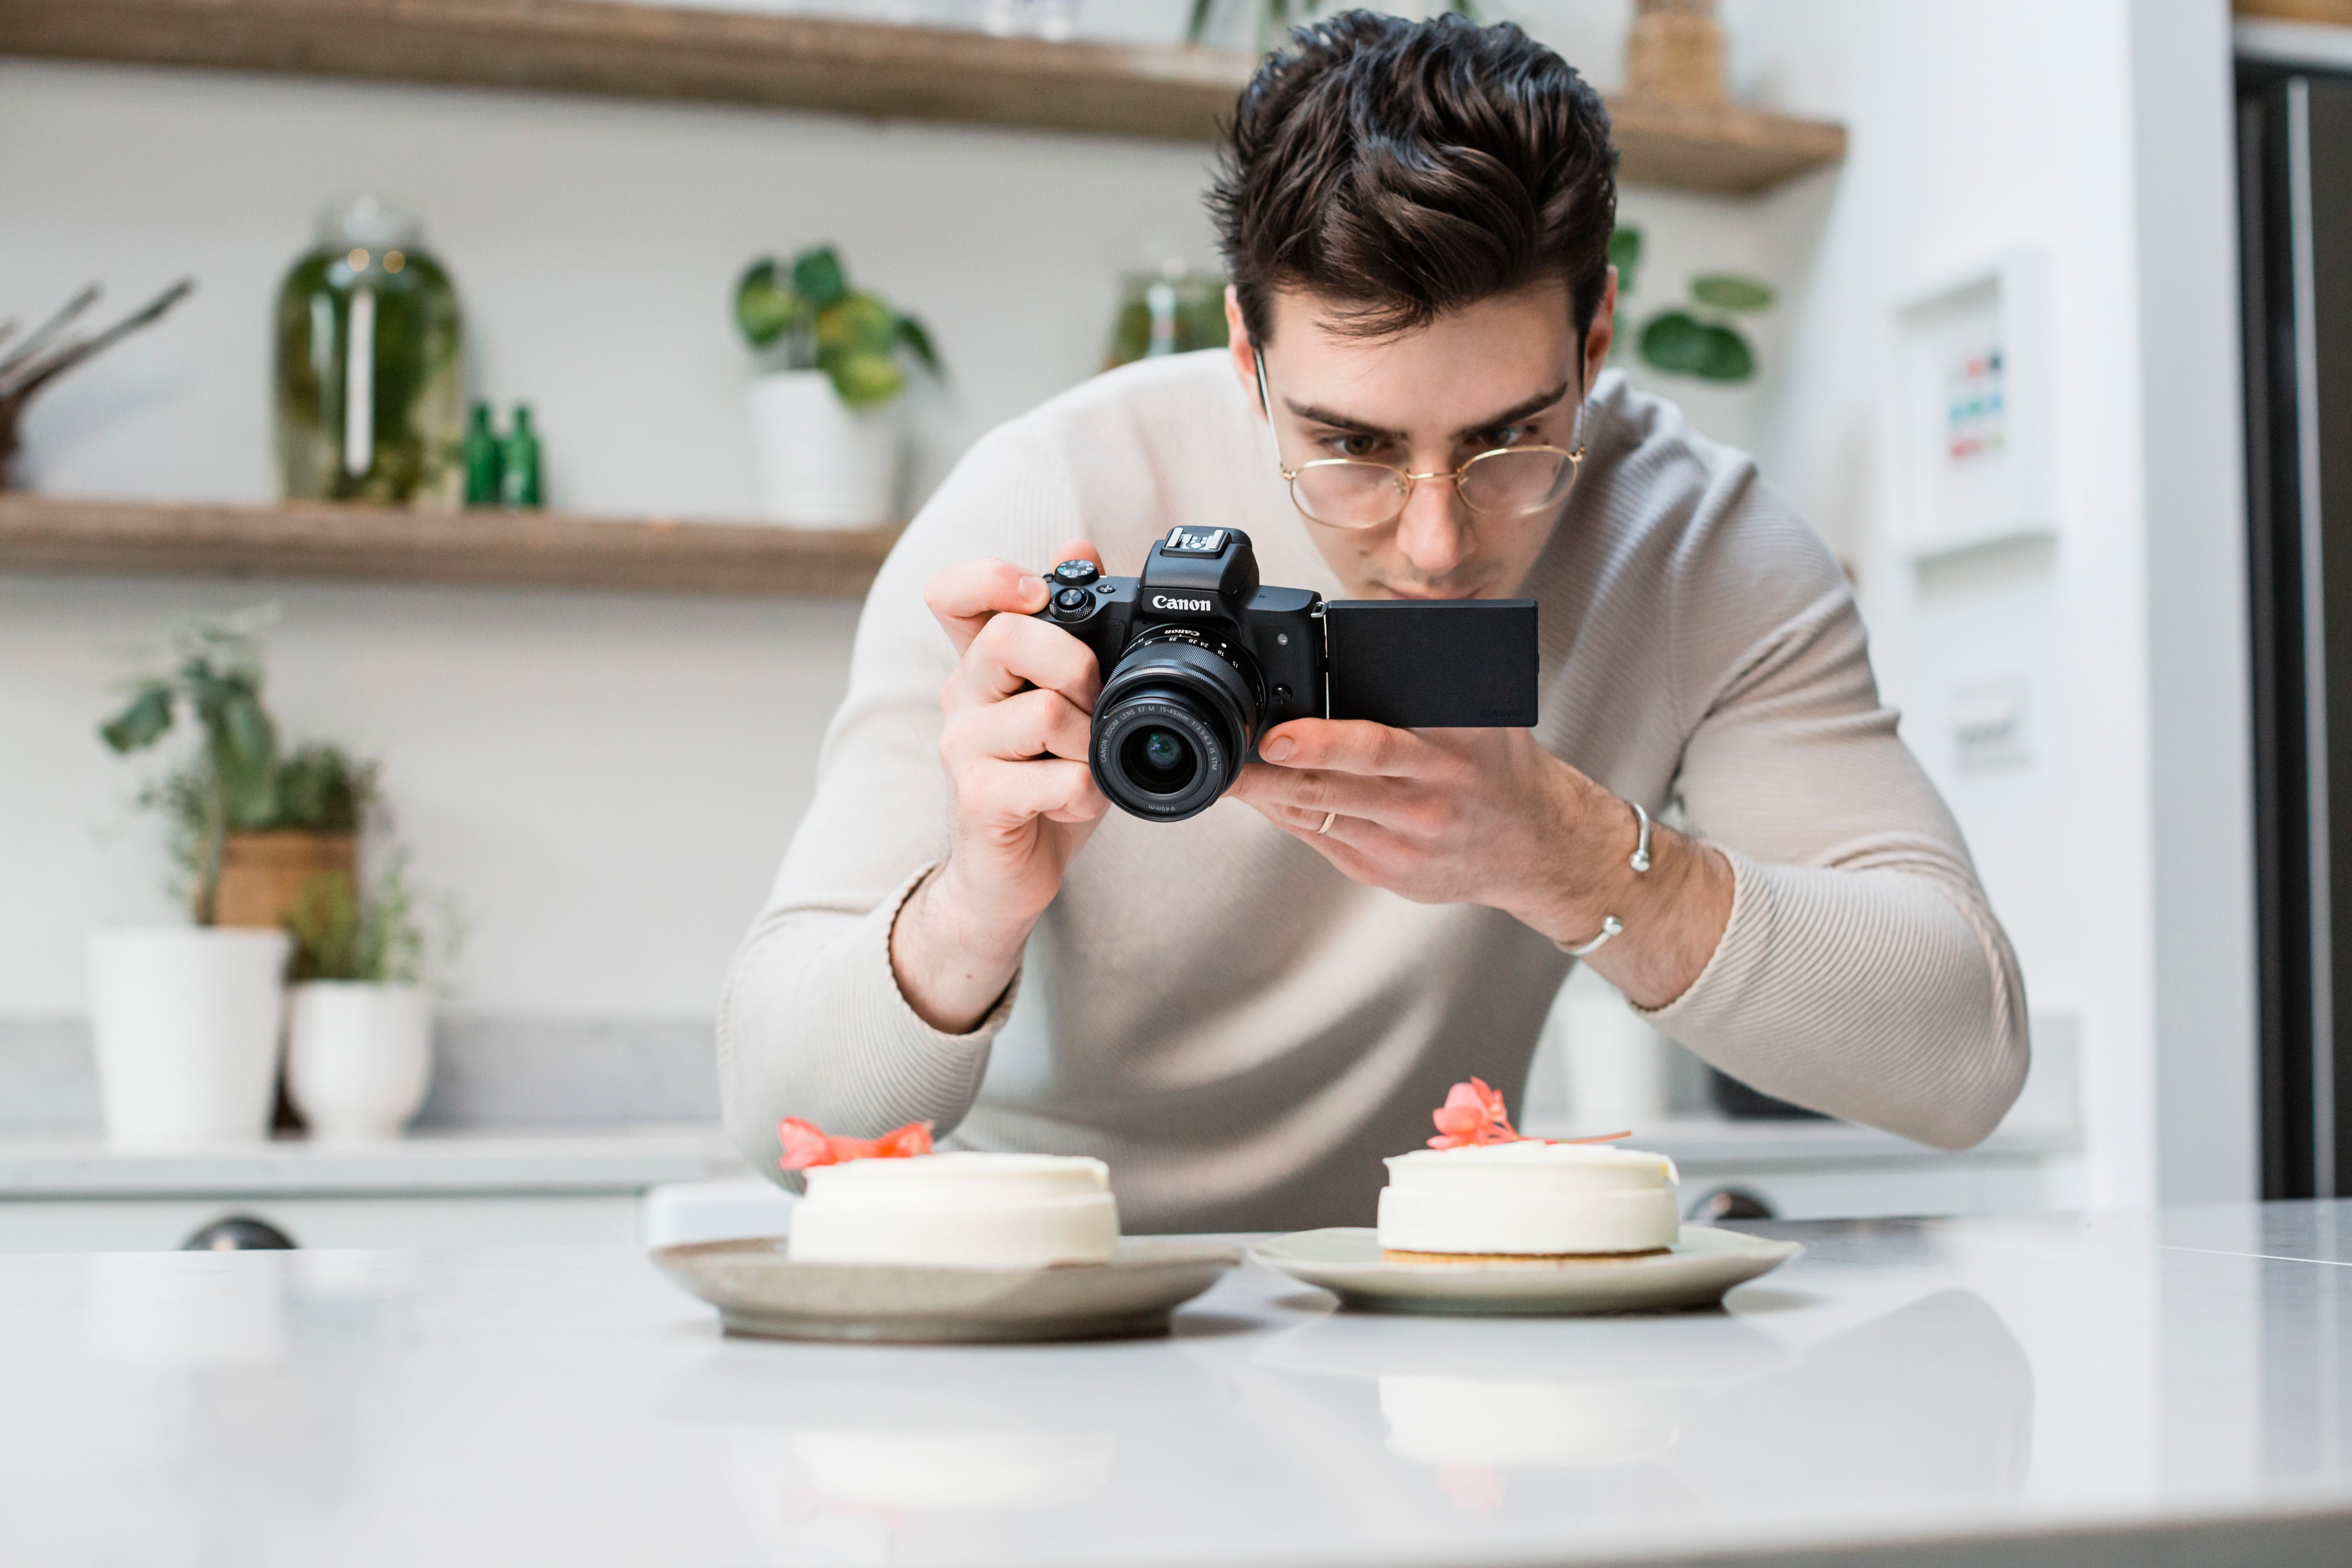 Introducing the EOS M50 Mark II